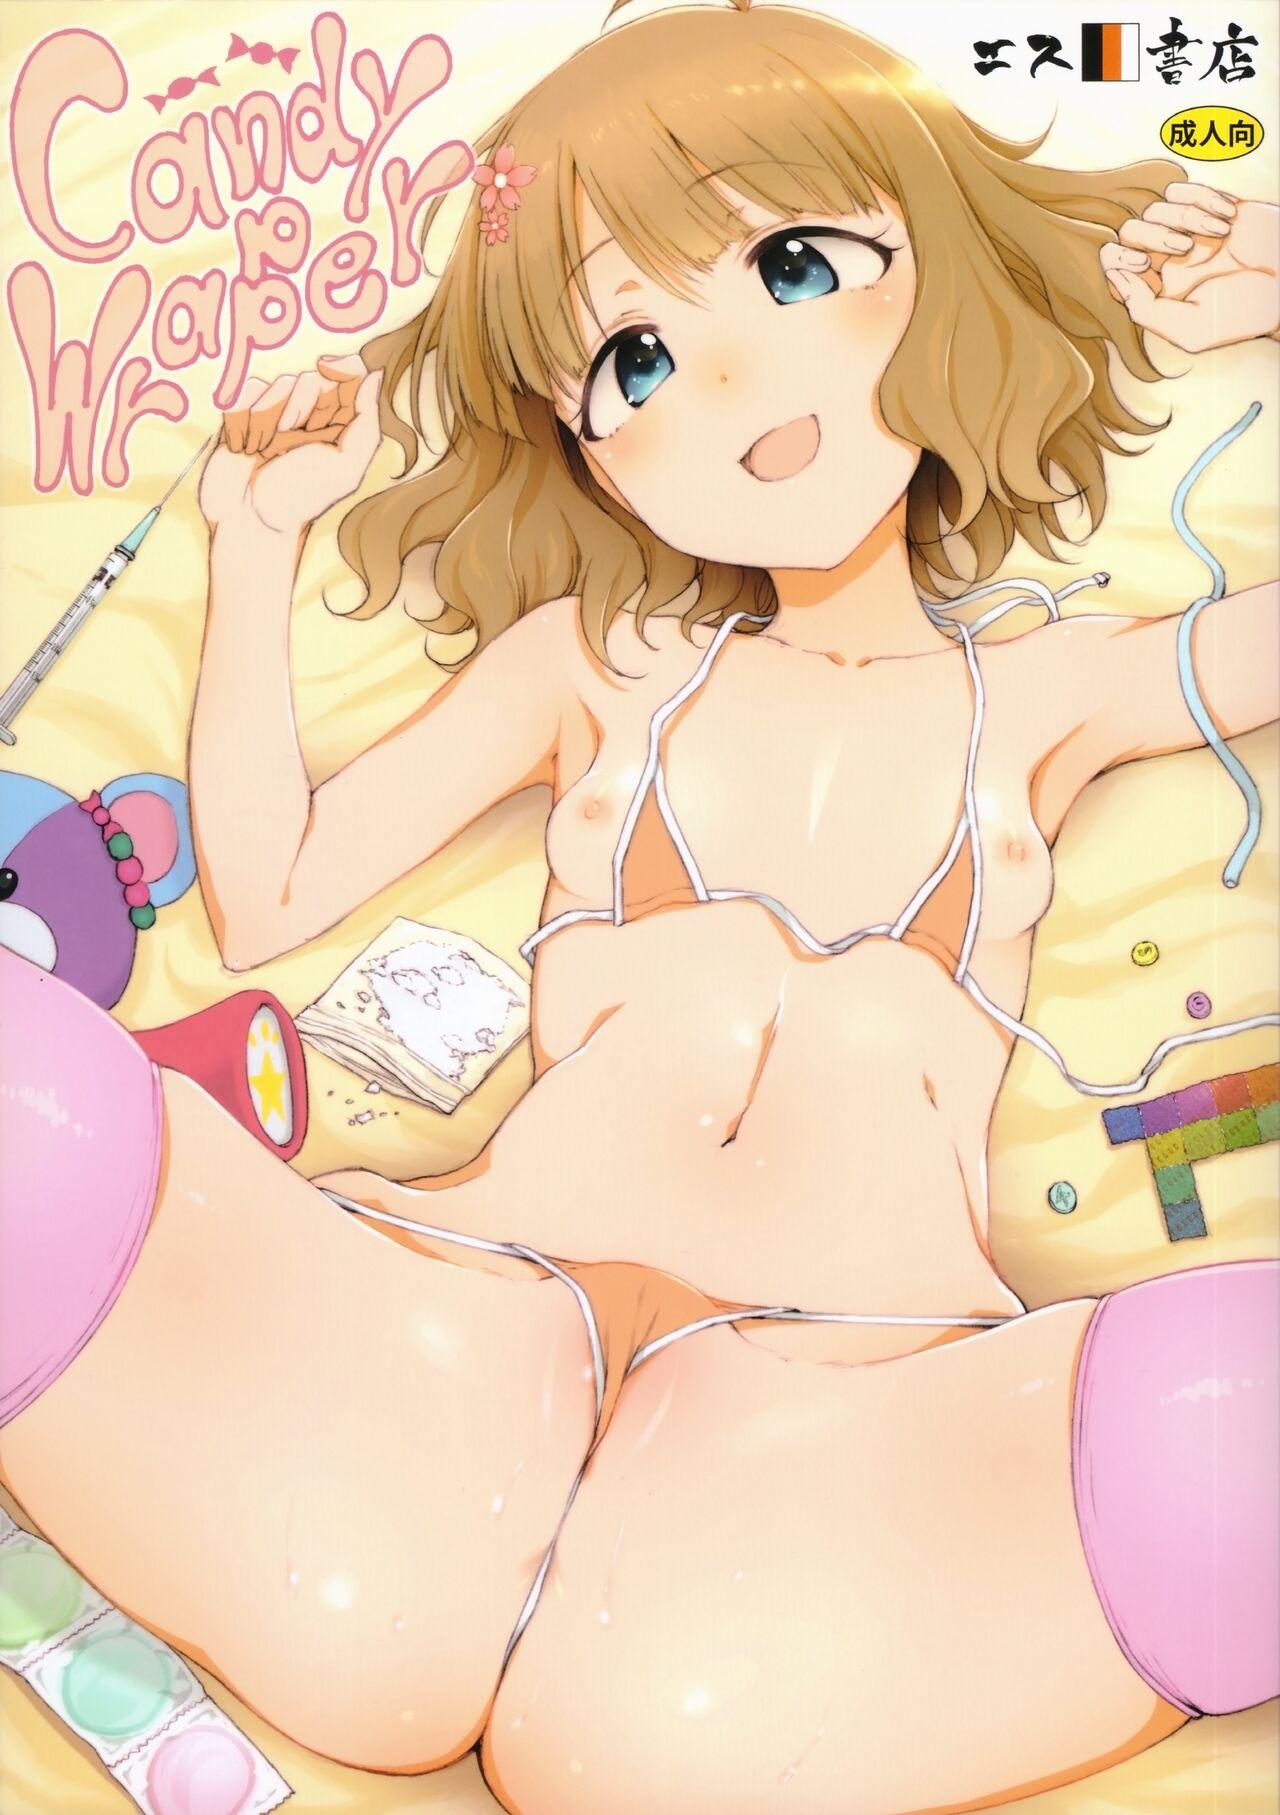 Fun Candy Wrapper - The idolmaster Panty - Page 2